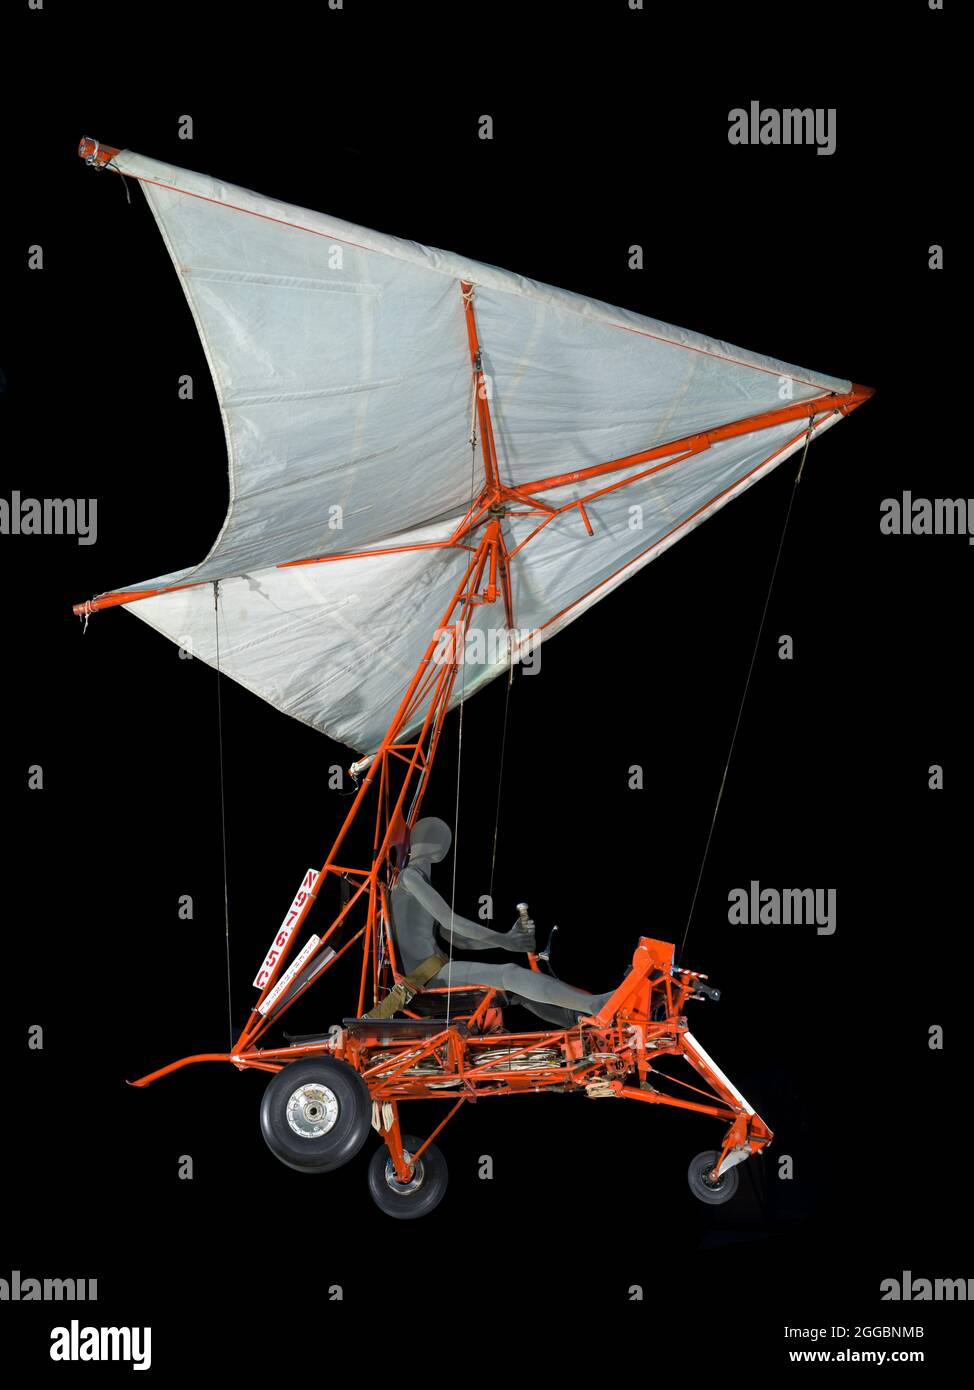 From 1962 to 1964, NASA used the Paresev to develop the technology for landing the two-man Gemini capsule on land, instead of parachuting into the ocean, as had been done in Project Mercury. The astronauts would release an inflatable paraglider wing based on the work of Francis Rogallo, and maneuver to a runway or dry lake bed. Astronauts &quot;Gus&quot; Grissom and Neil Armstrong were among those who piloted the Paresev during several hundred flights at Edwards Air Force Base in California. The Paresev was towed by a ground vehicle or a small aircraft and released at an altitude between 5,000 Stock Photo